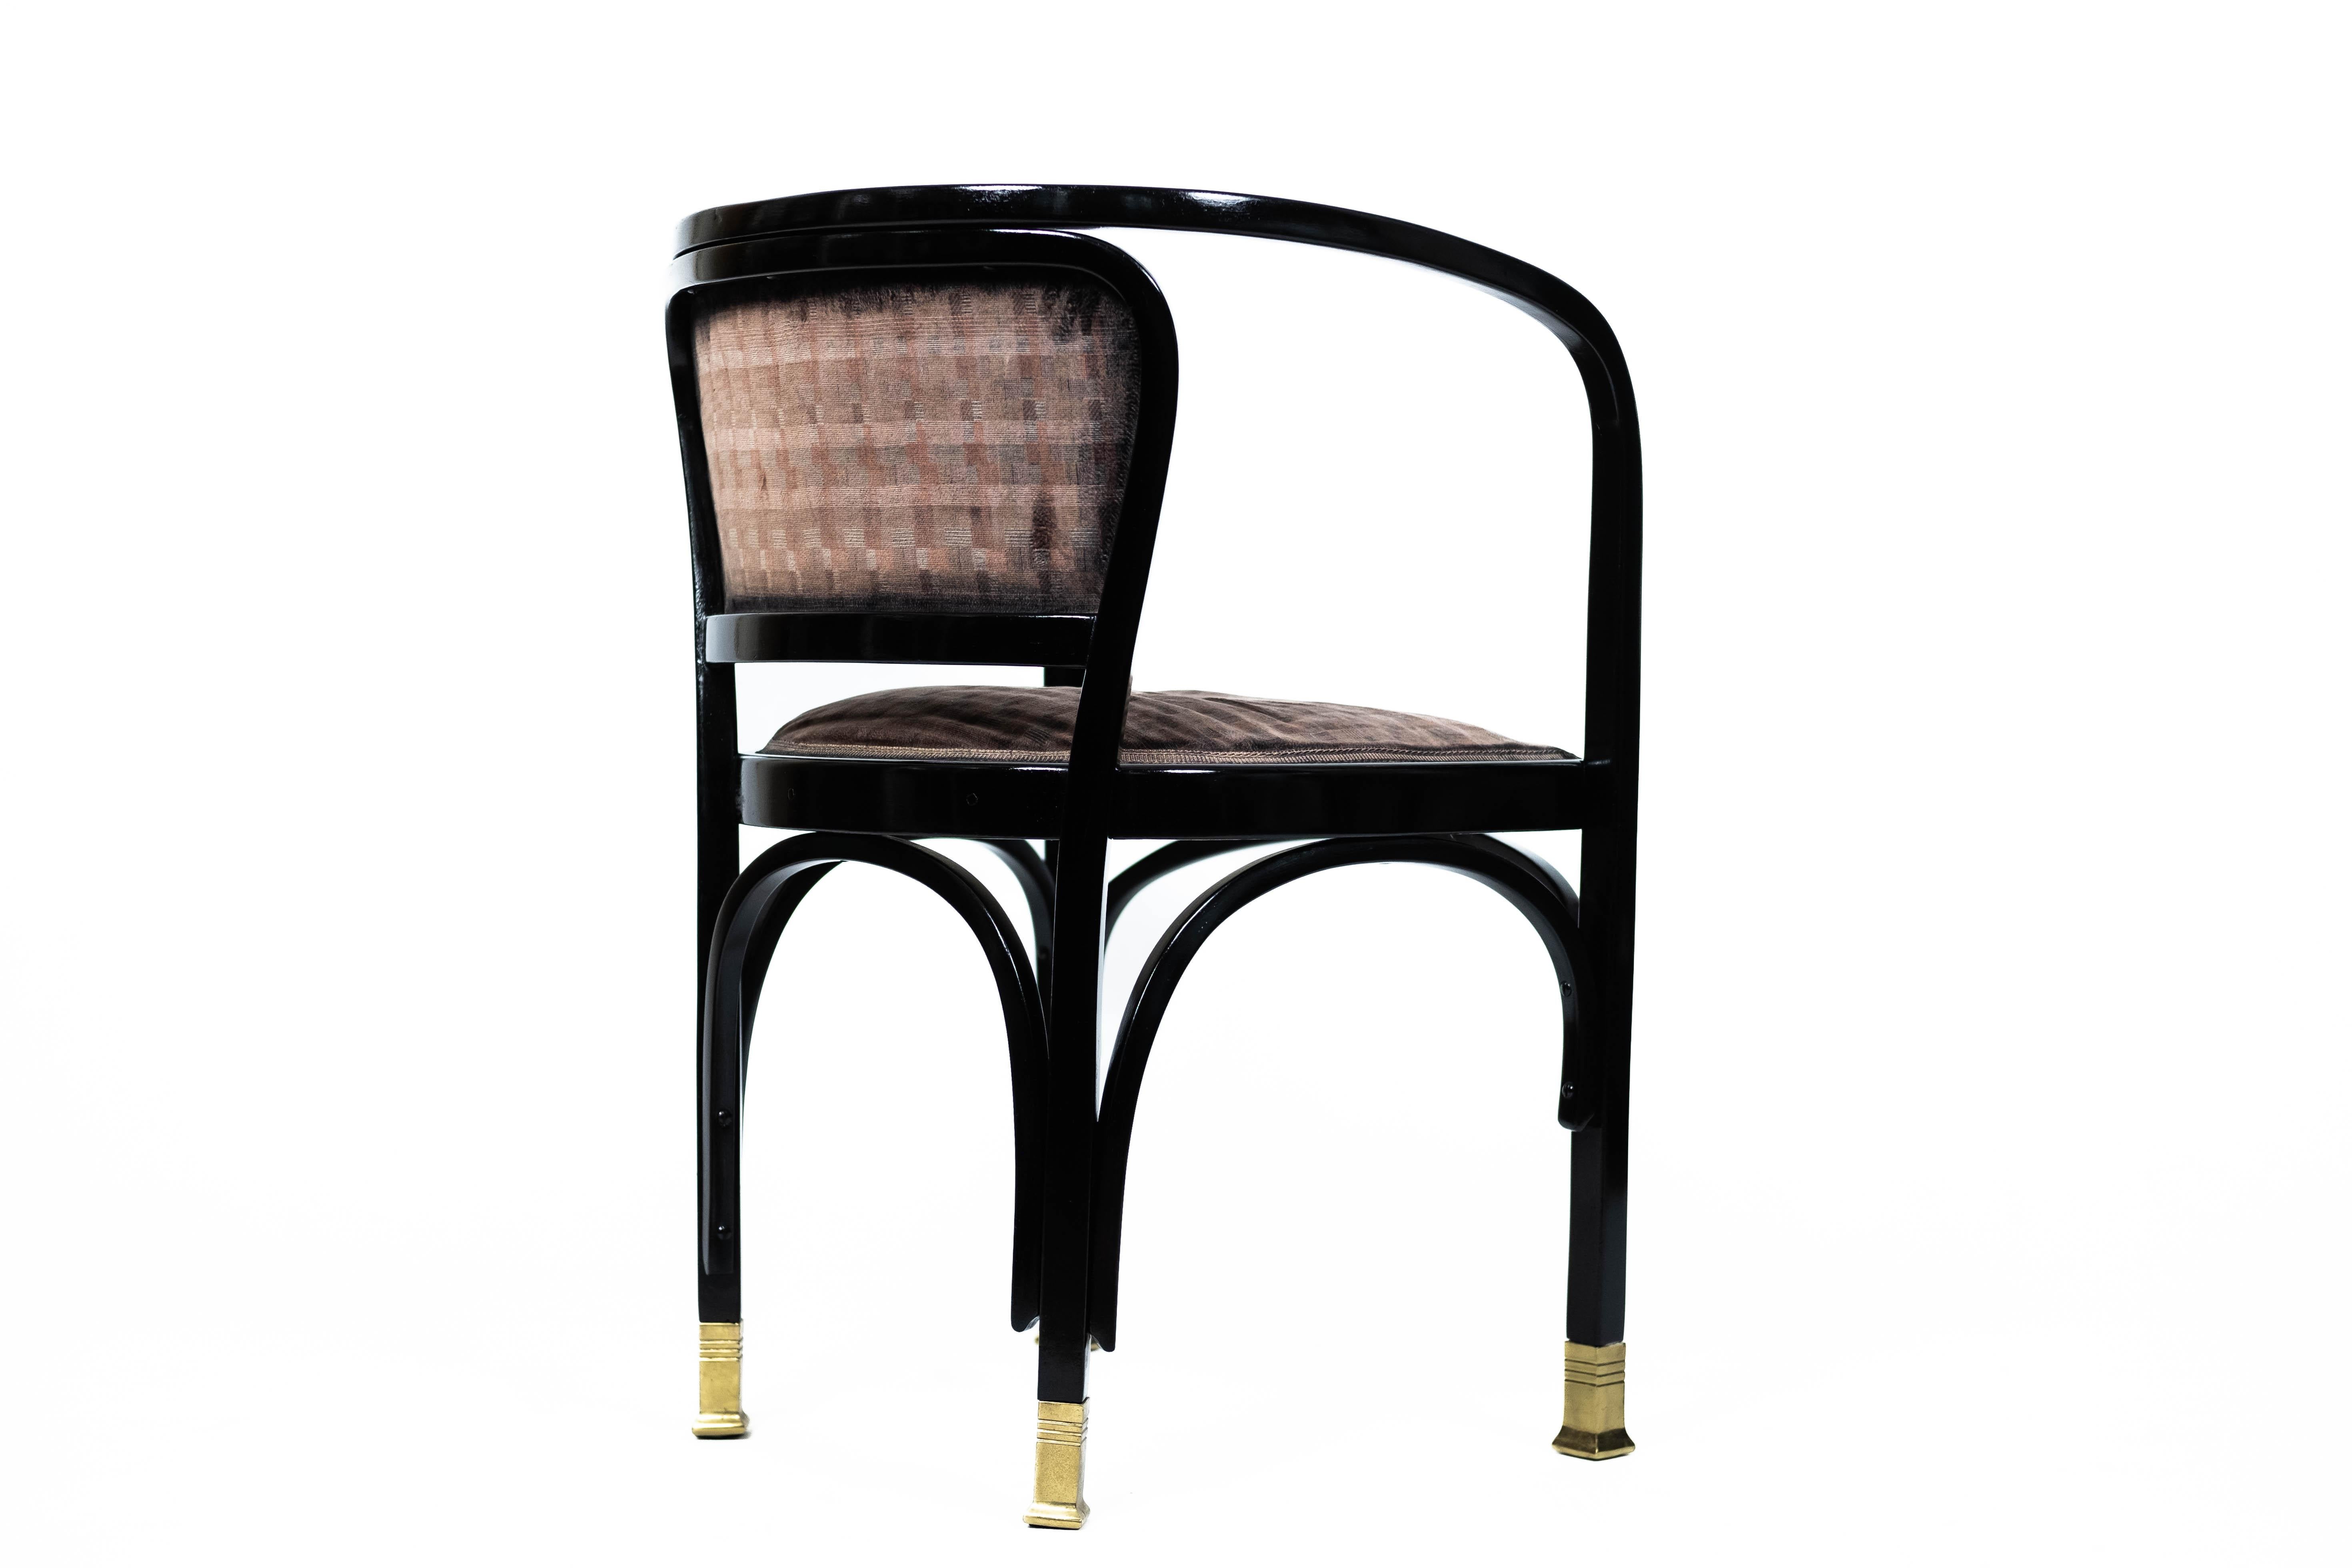 Secessionistic Chairs by Gustav Siegel, ex. by J.J.Kohn (Vienna, 1900) For Sale 1